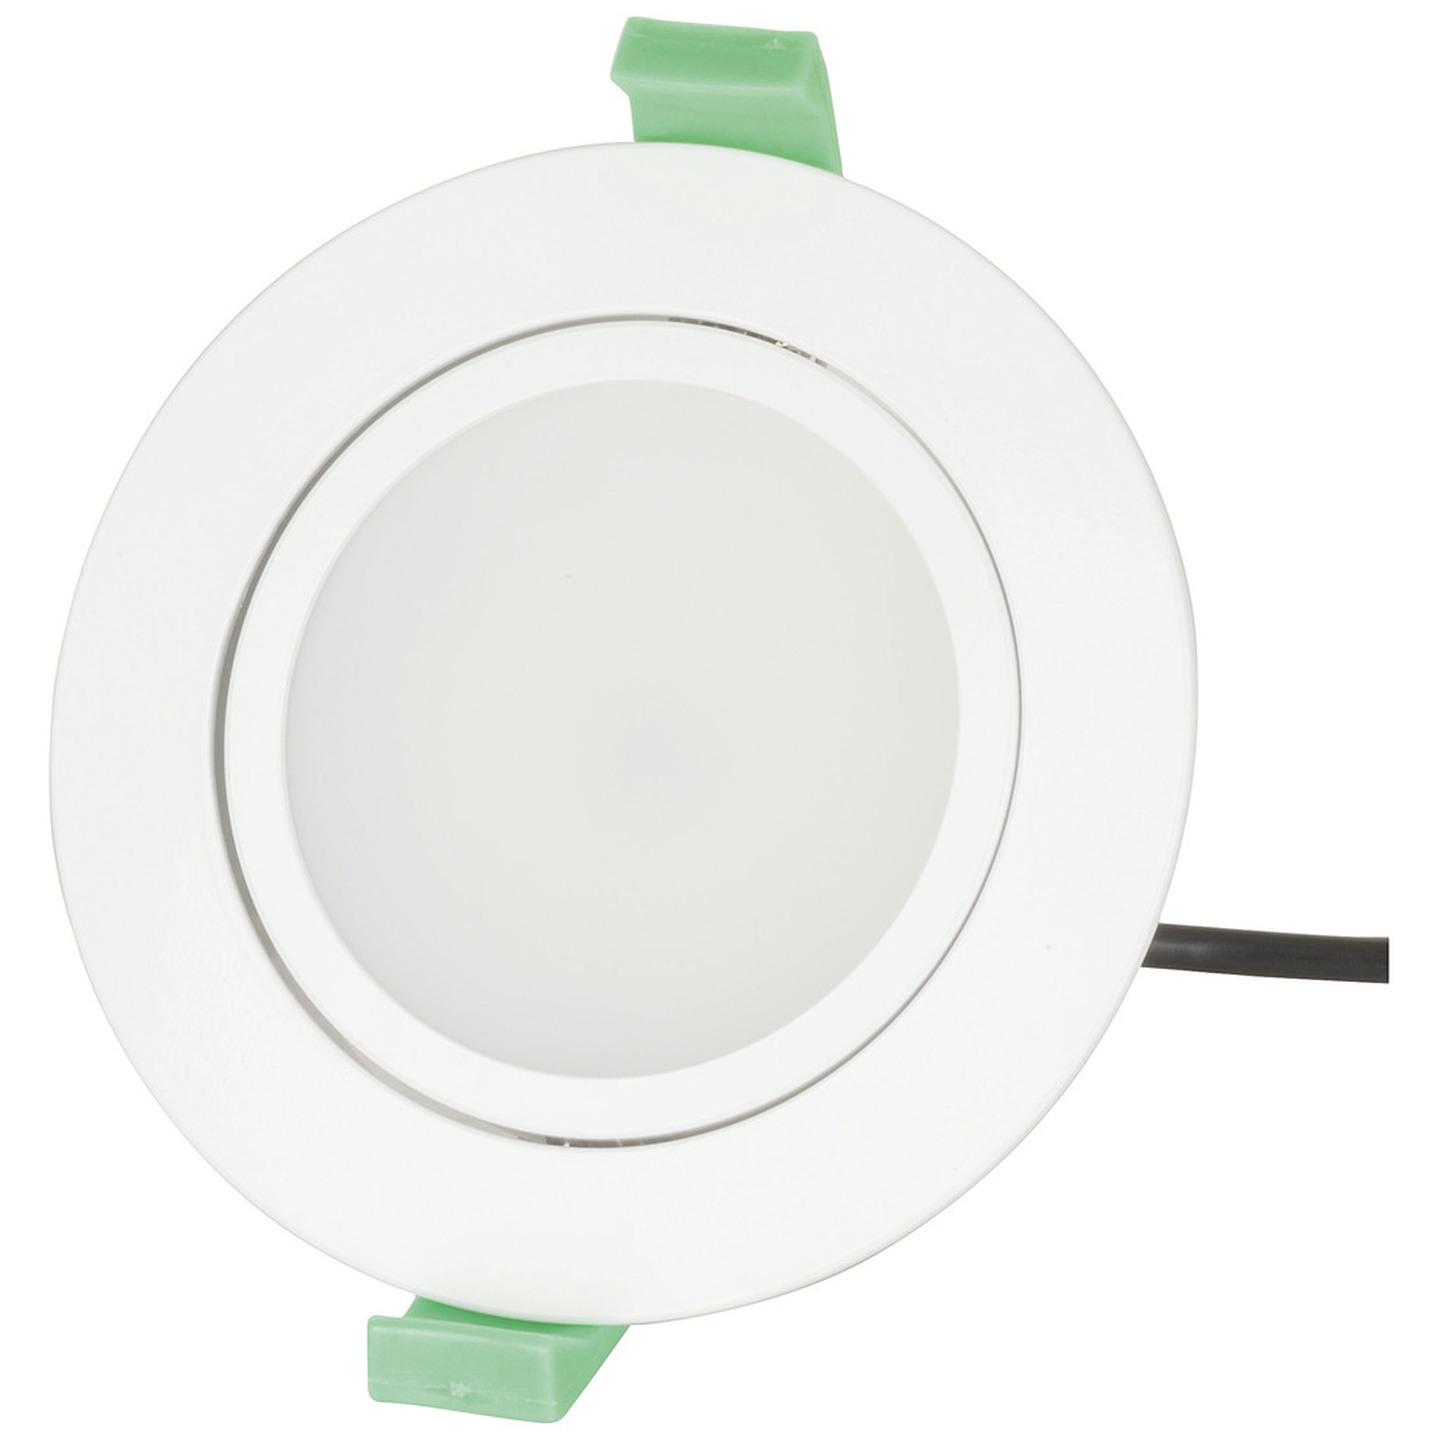 Remote Controlled 12W LED Downlight with Colour Temp & Brightness Control